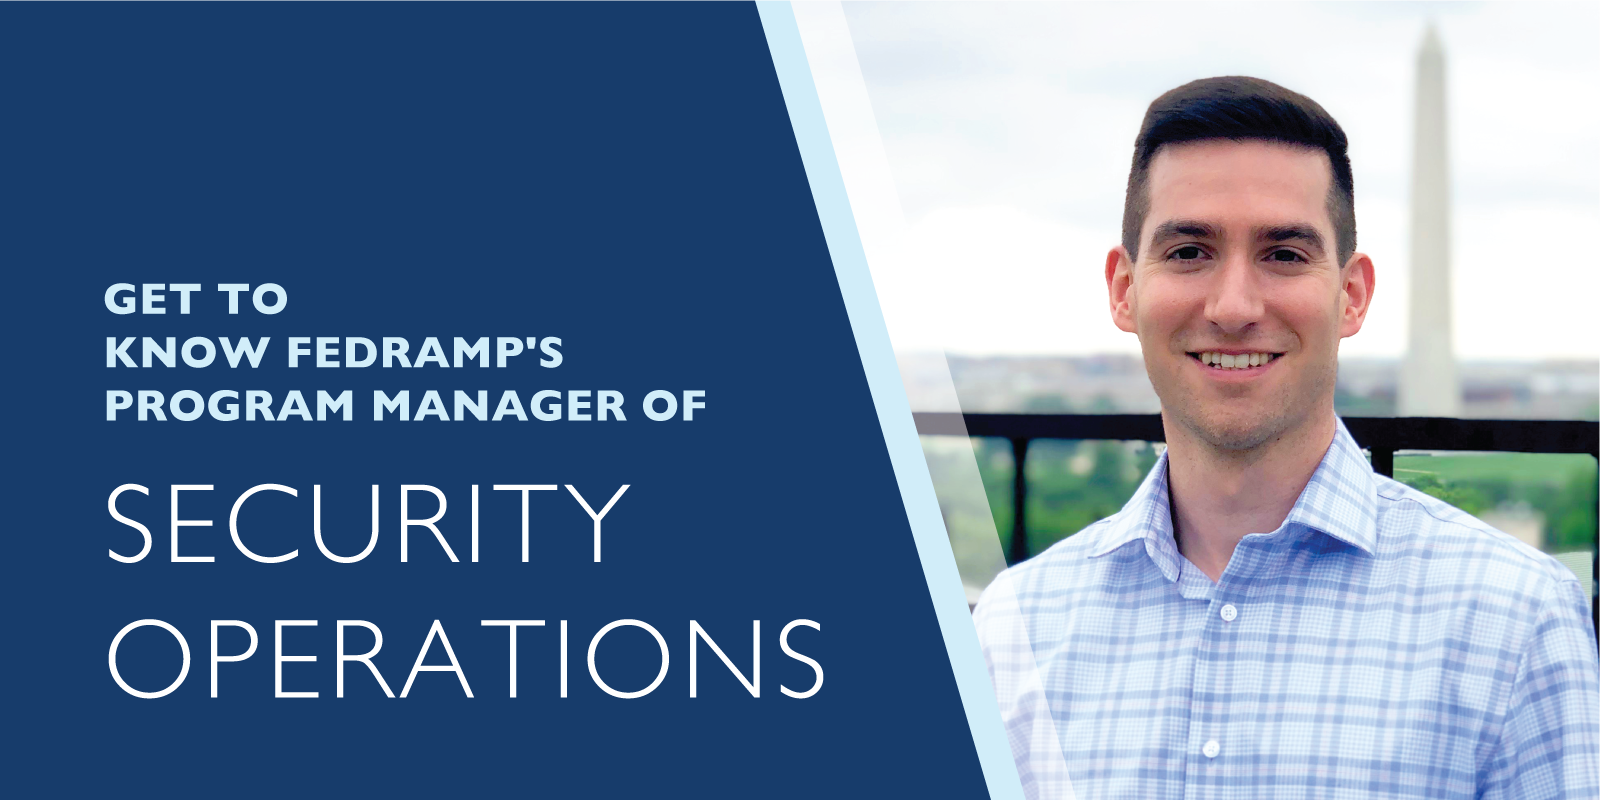 Get to Know FedRAMP's Program Manager of Security Operations